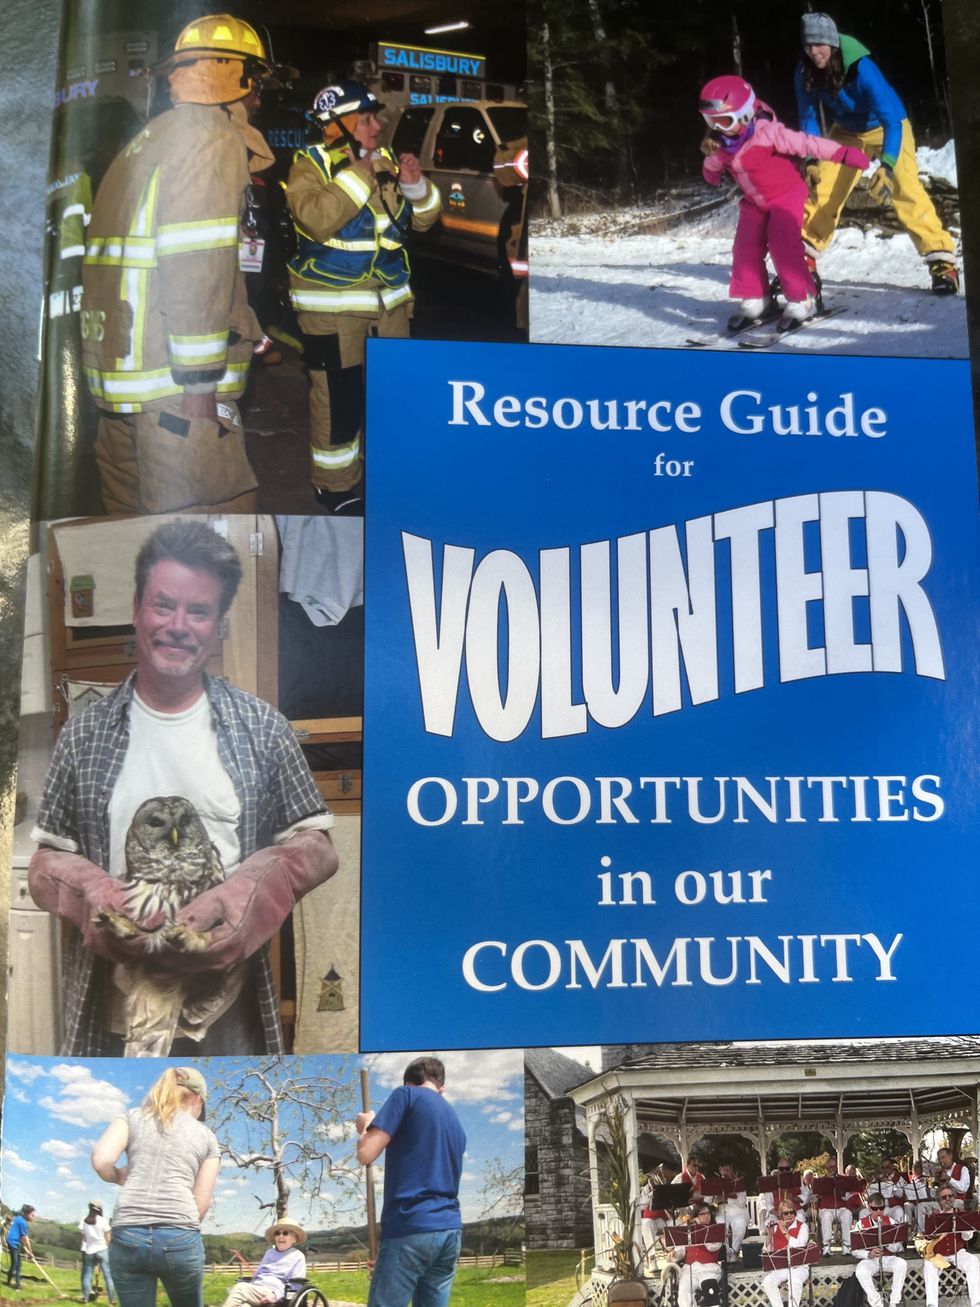 Want to feel closer to your community? Volunteer.